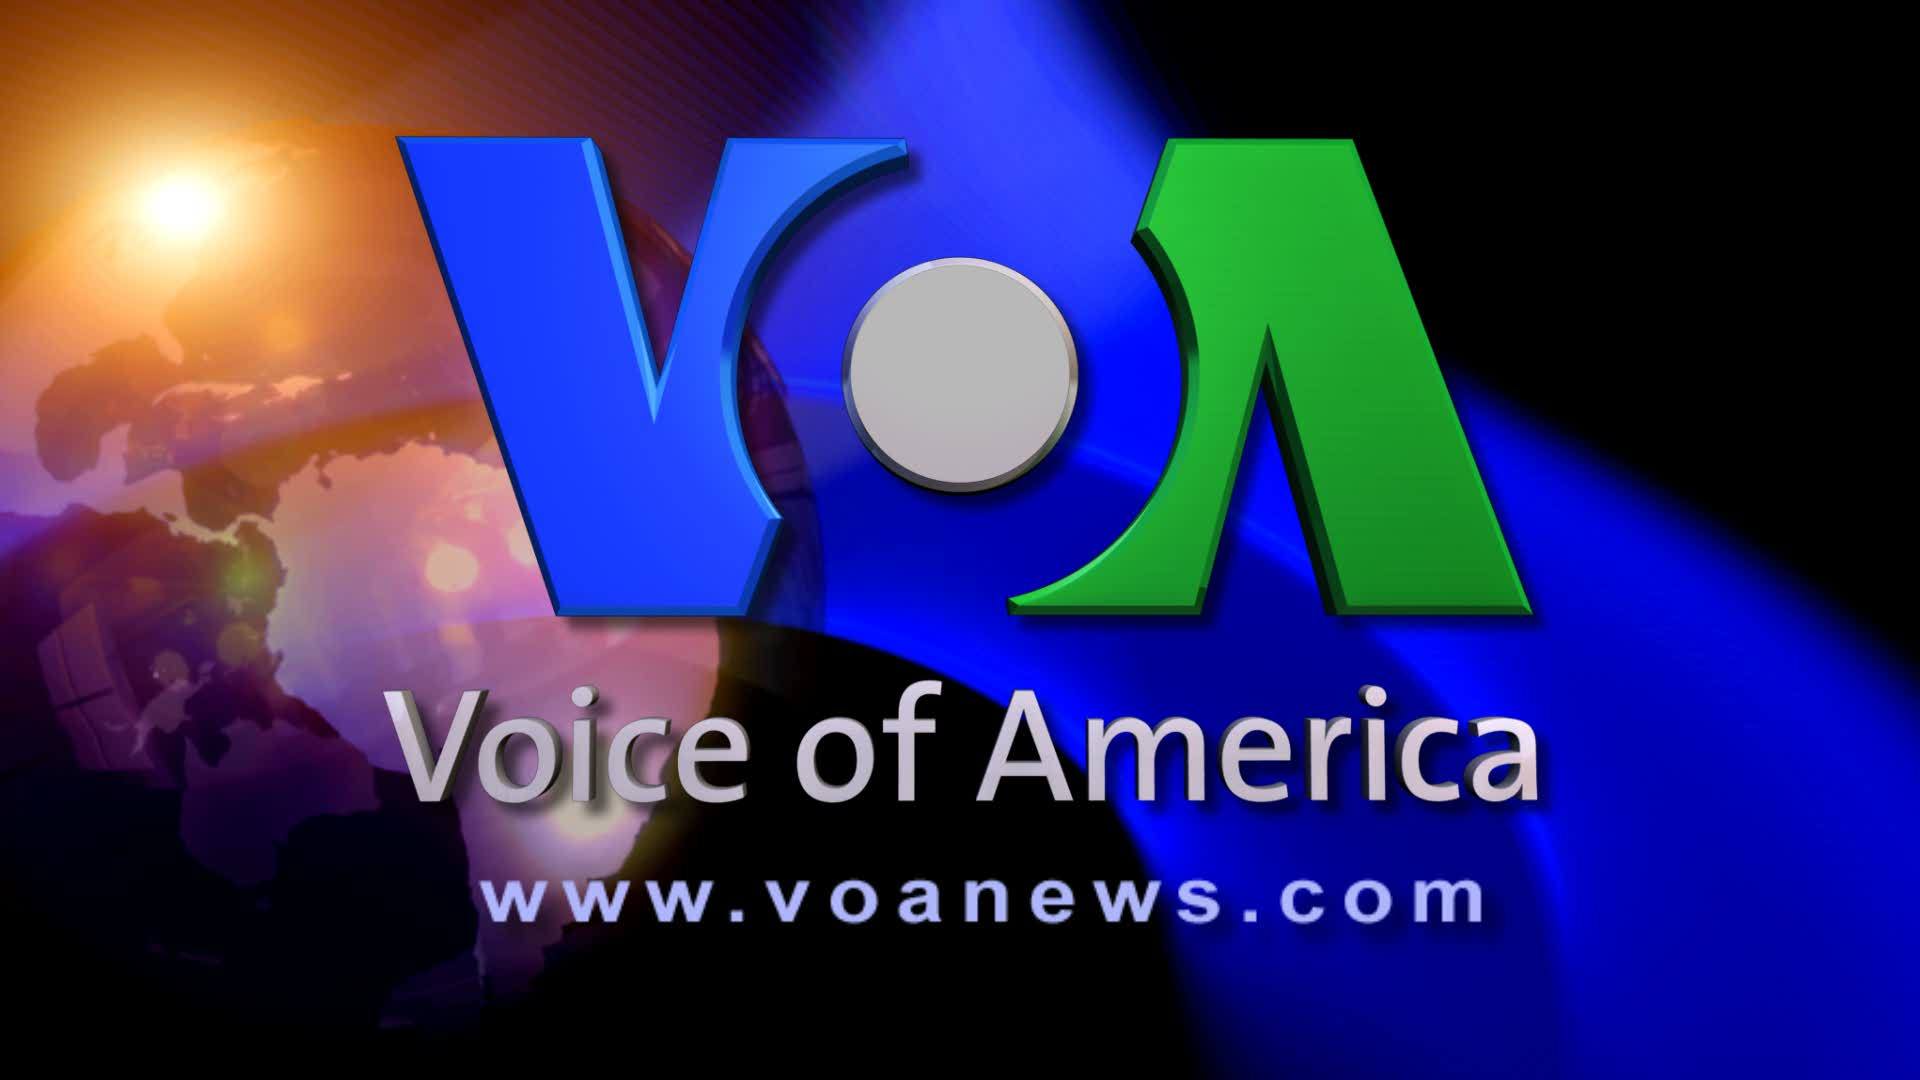 Beethoven for the Indus Valley - Voice of America TV